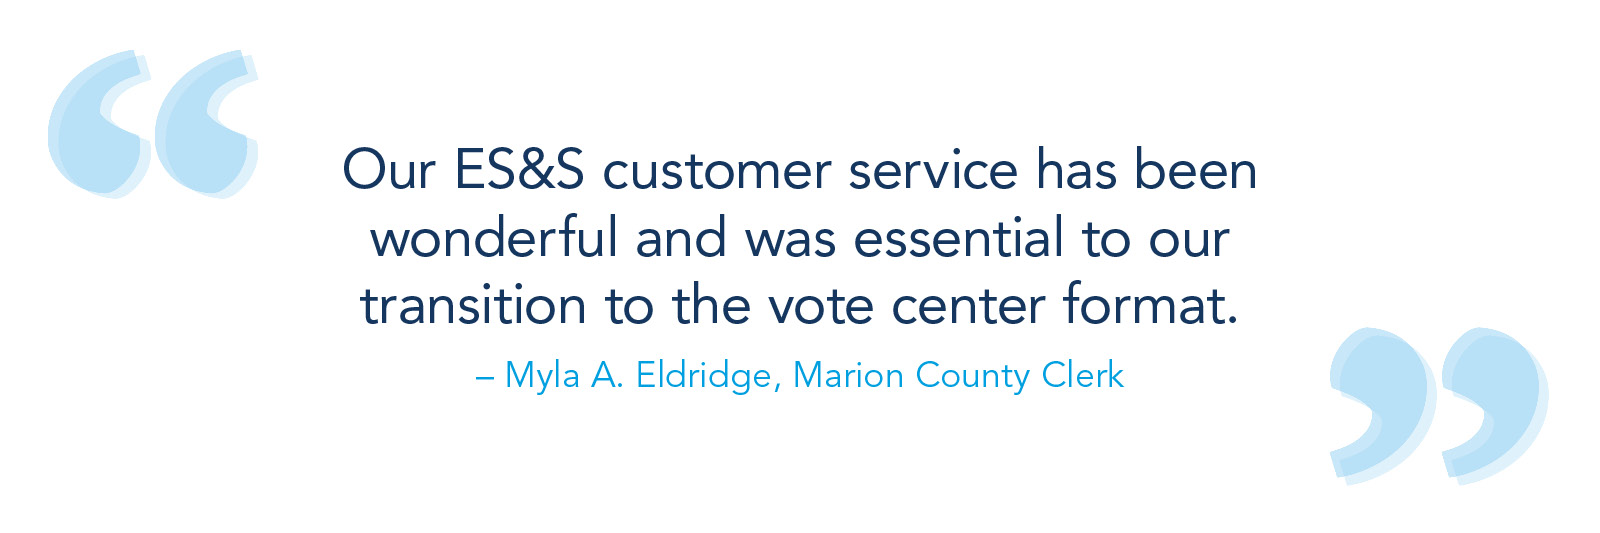 Our ES&S customer service has been wonderful and was essential to our transition to the vote center format.